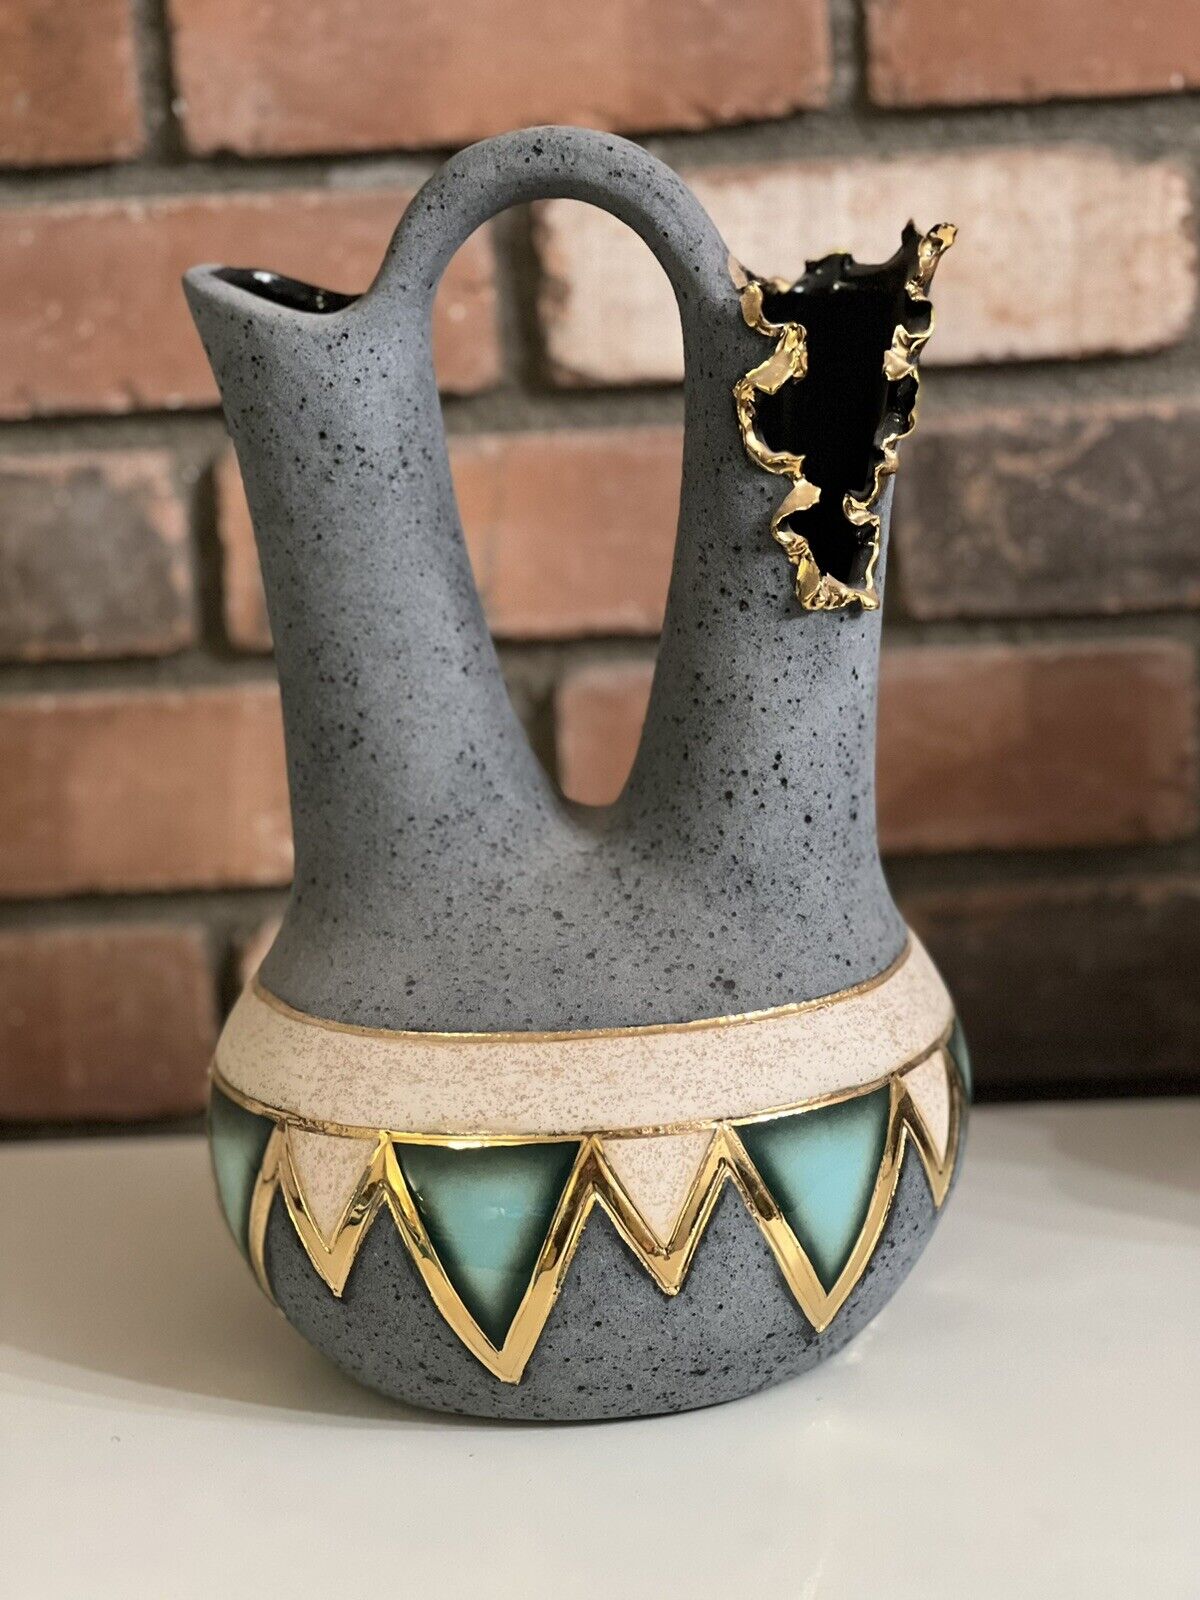 Stunning Native American Wedding Vase With Gold Leaf Accents. Signed 13” Tall